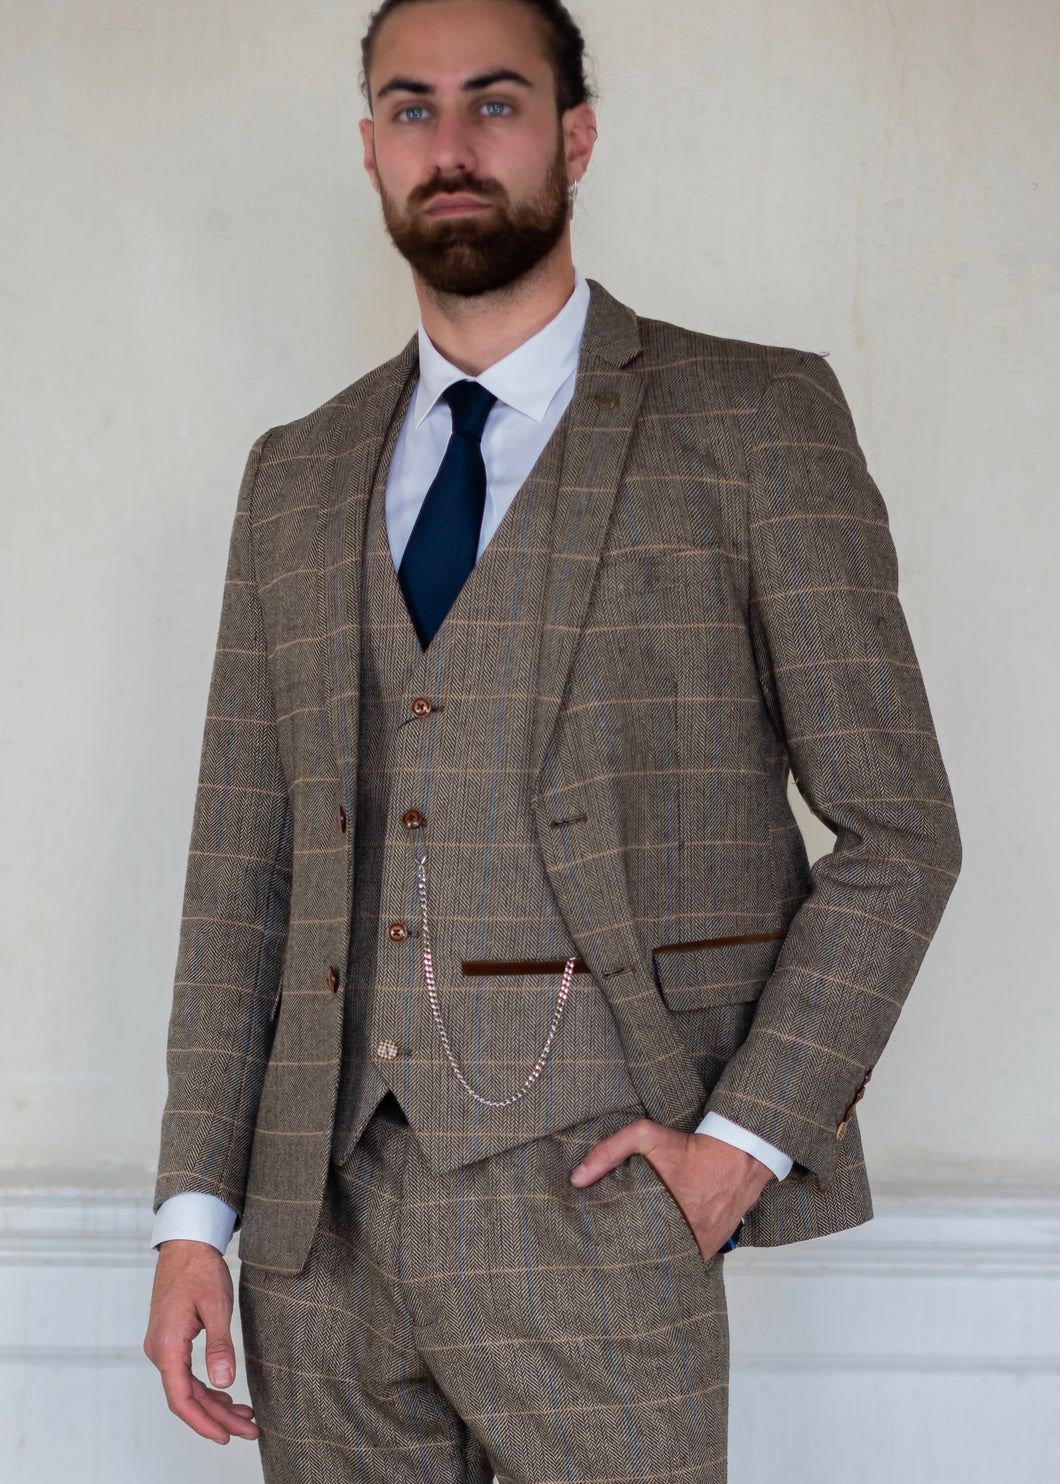 Marc Darcy Ted Tweed Jacket & Waistcoat complete with pocket watch and navy tie on a Suave Owl crisp white shirt